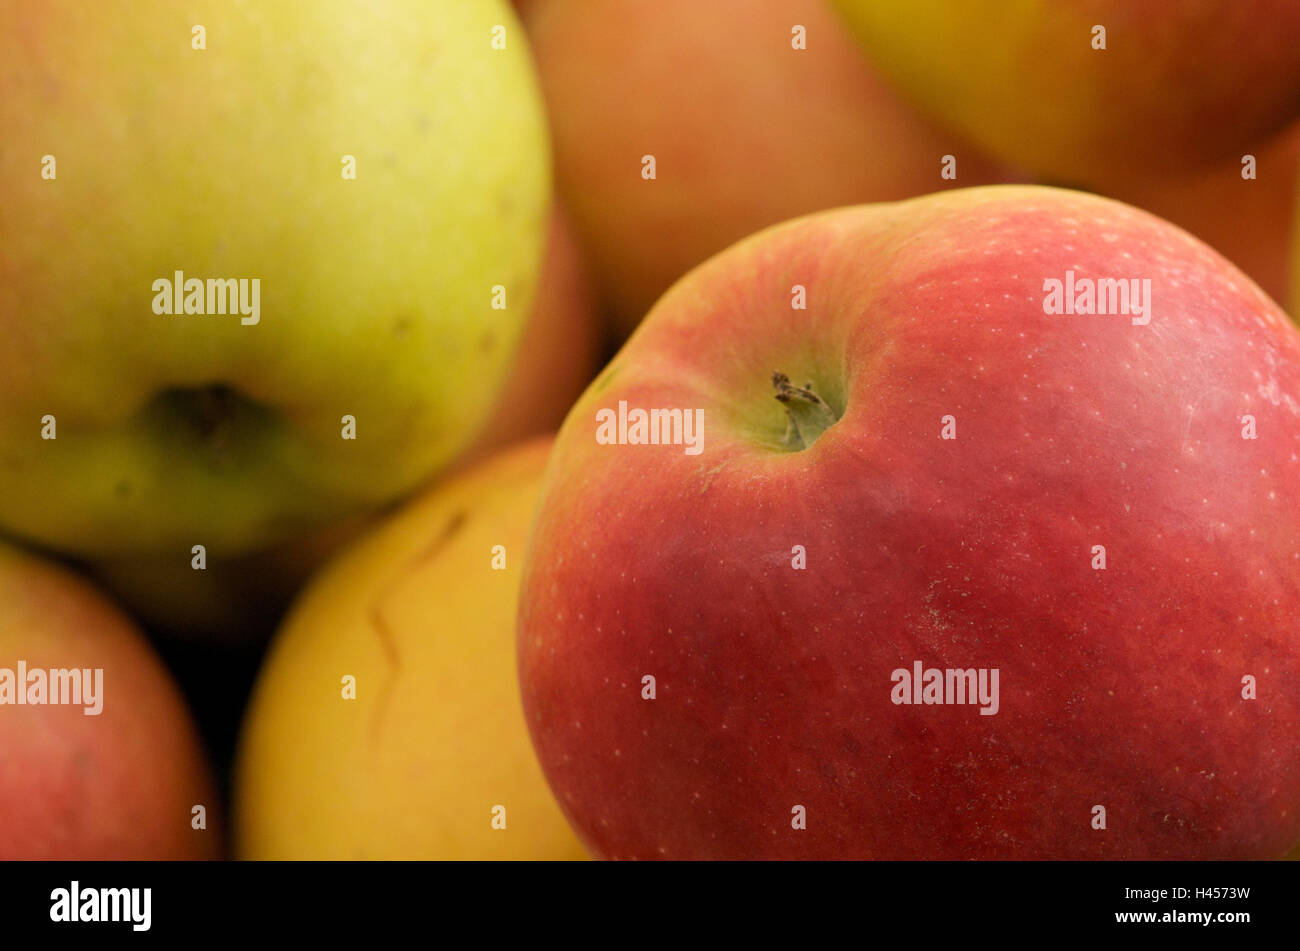 Apples, ripe, fruit, colours, passed away, red, green, yellow, medium close-up, Stock Photo